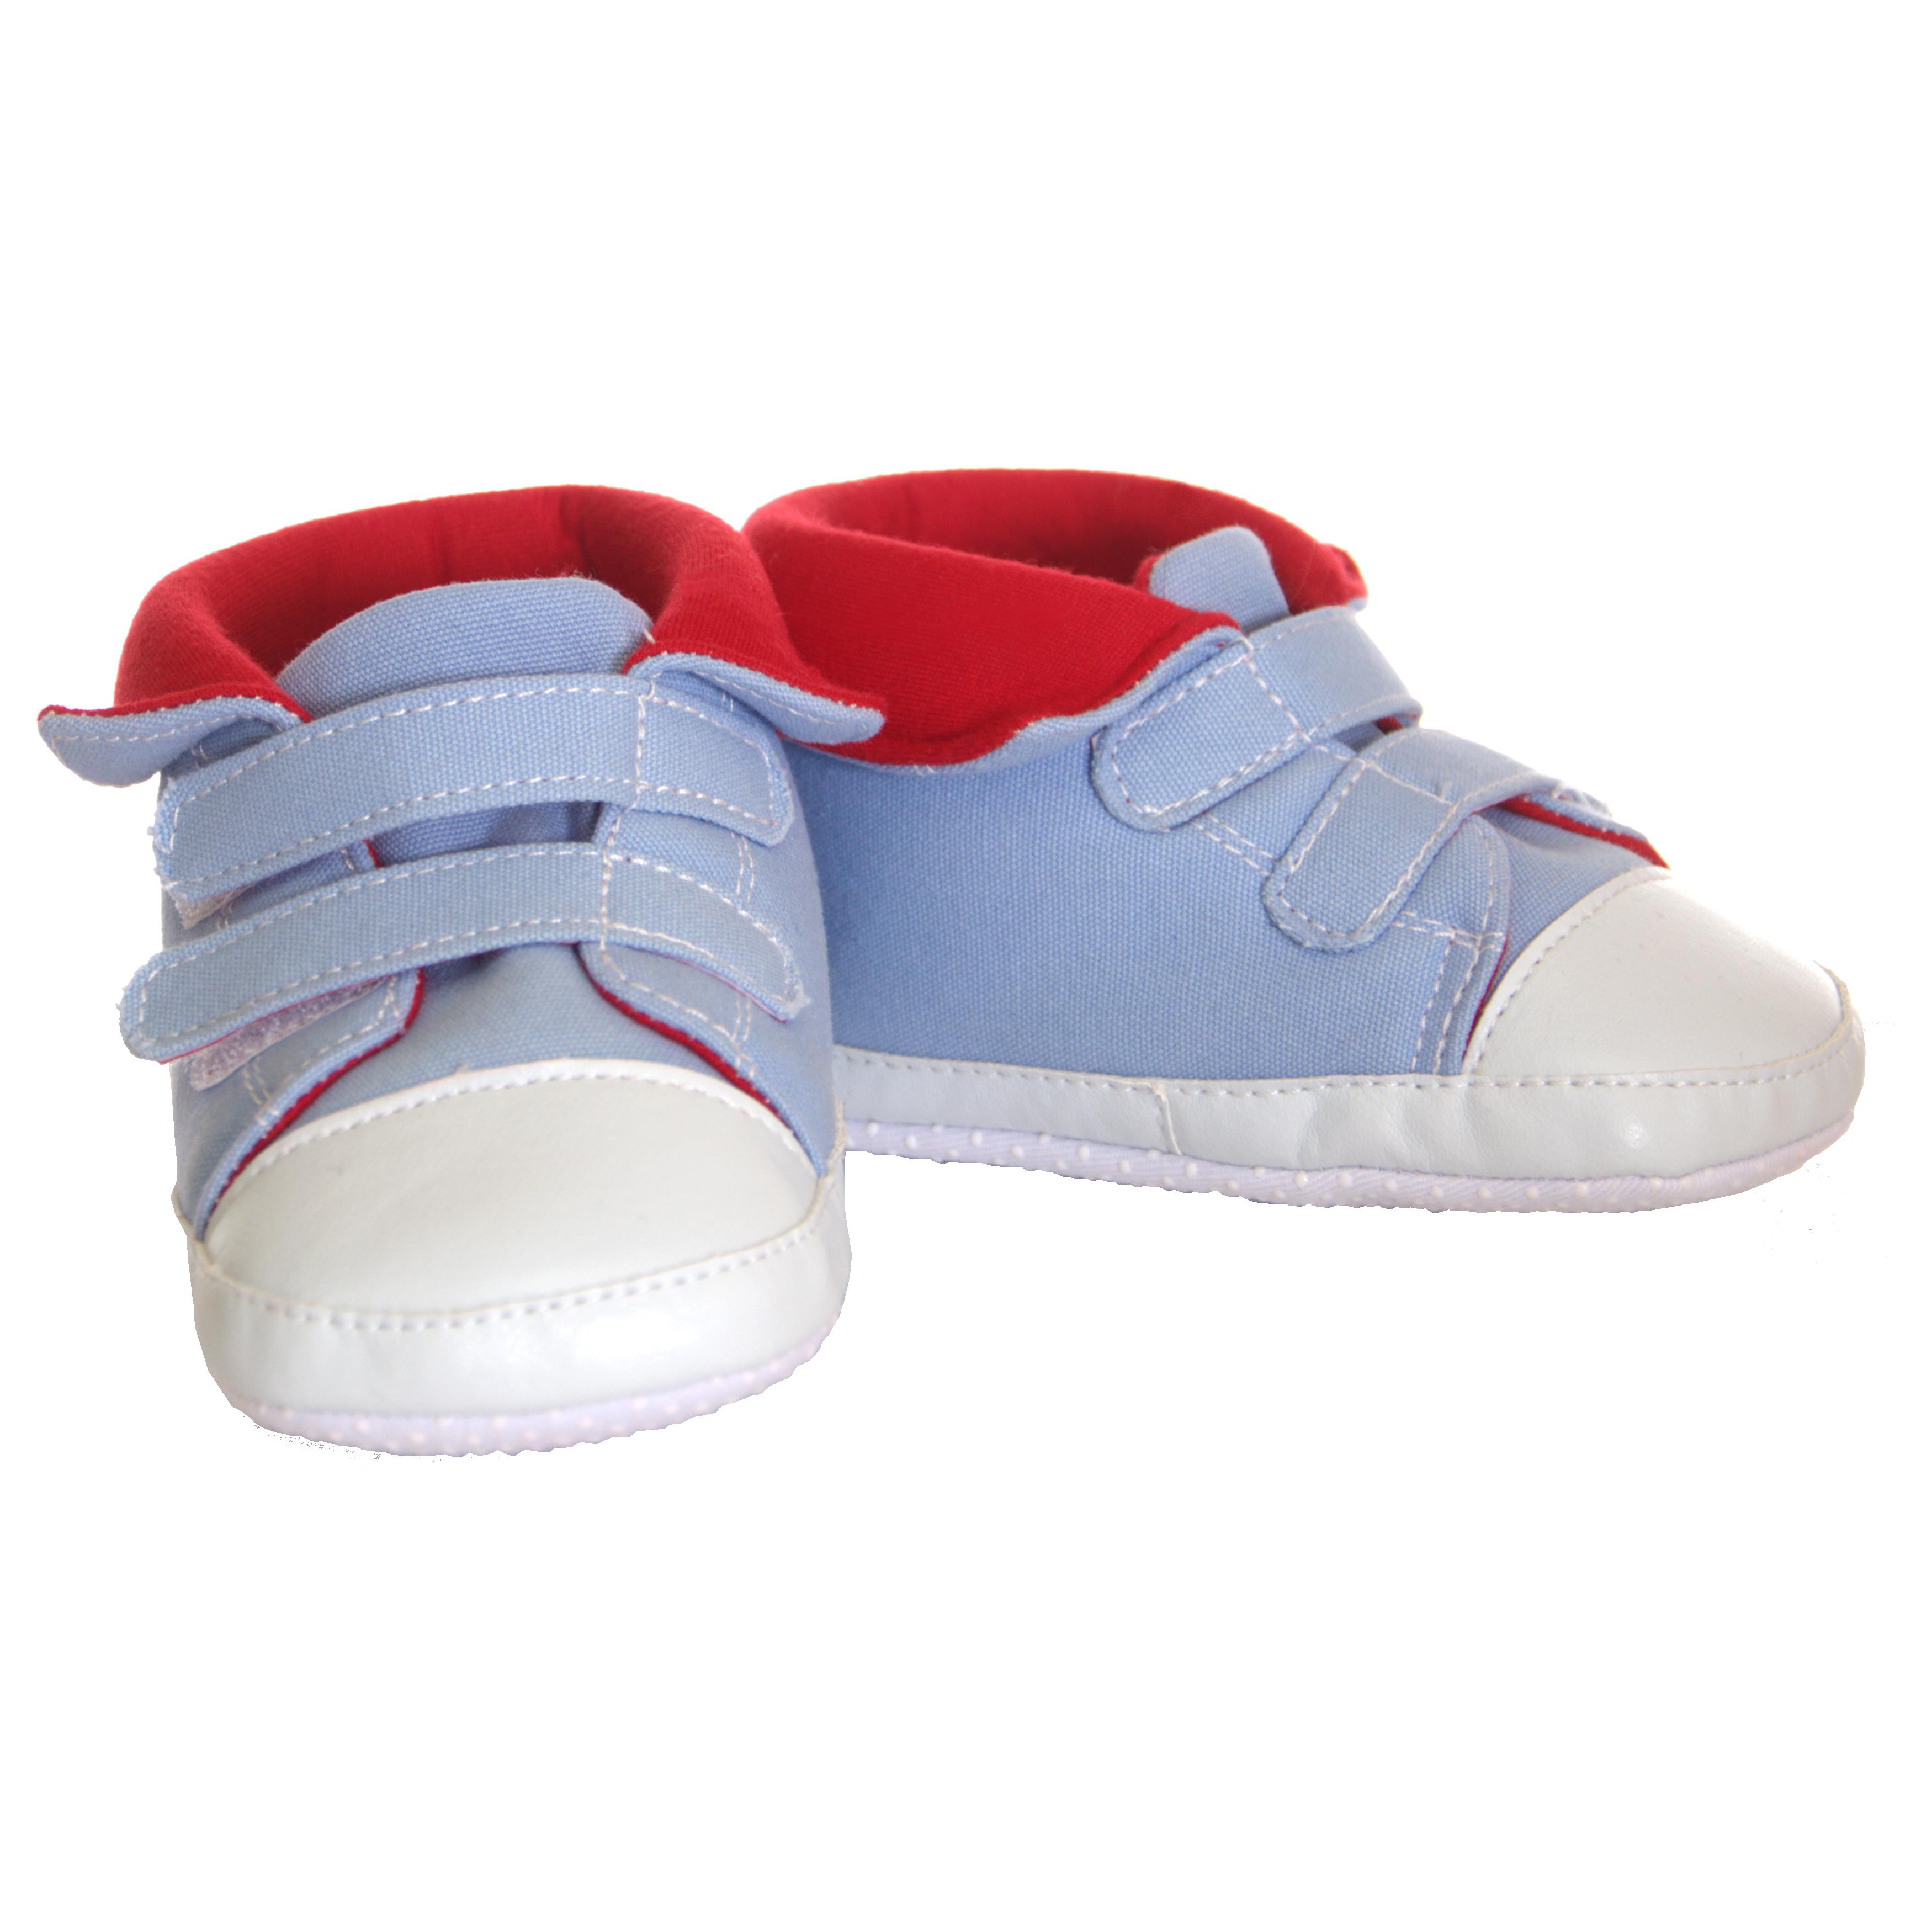 Living Puppets clothing: sneakers red/blue (for hand puppets 65 cm)